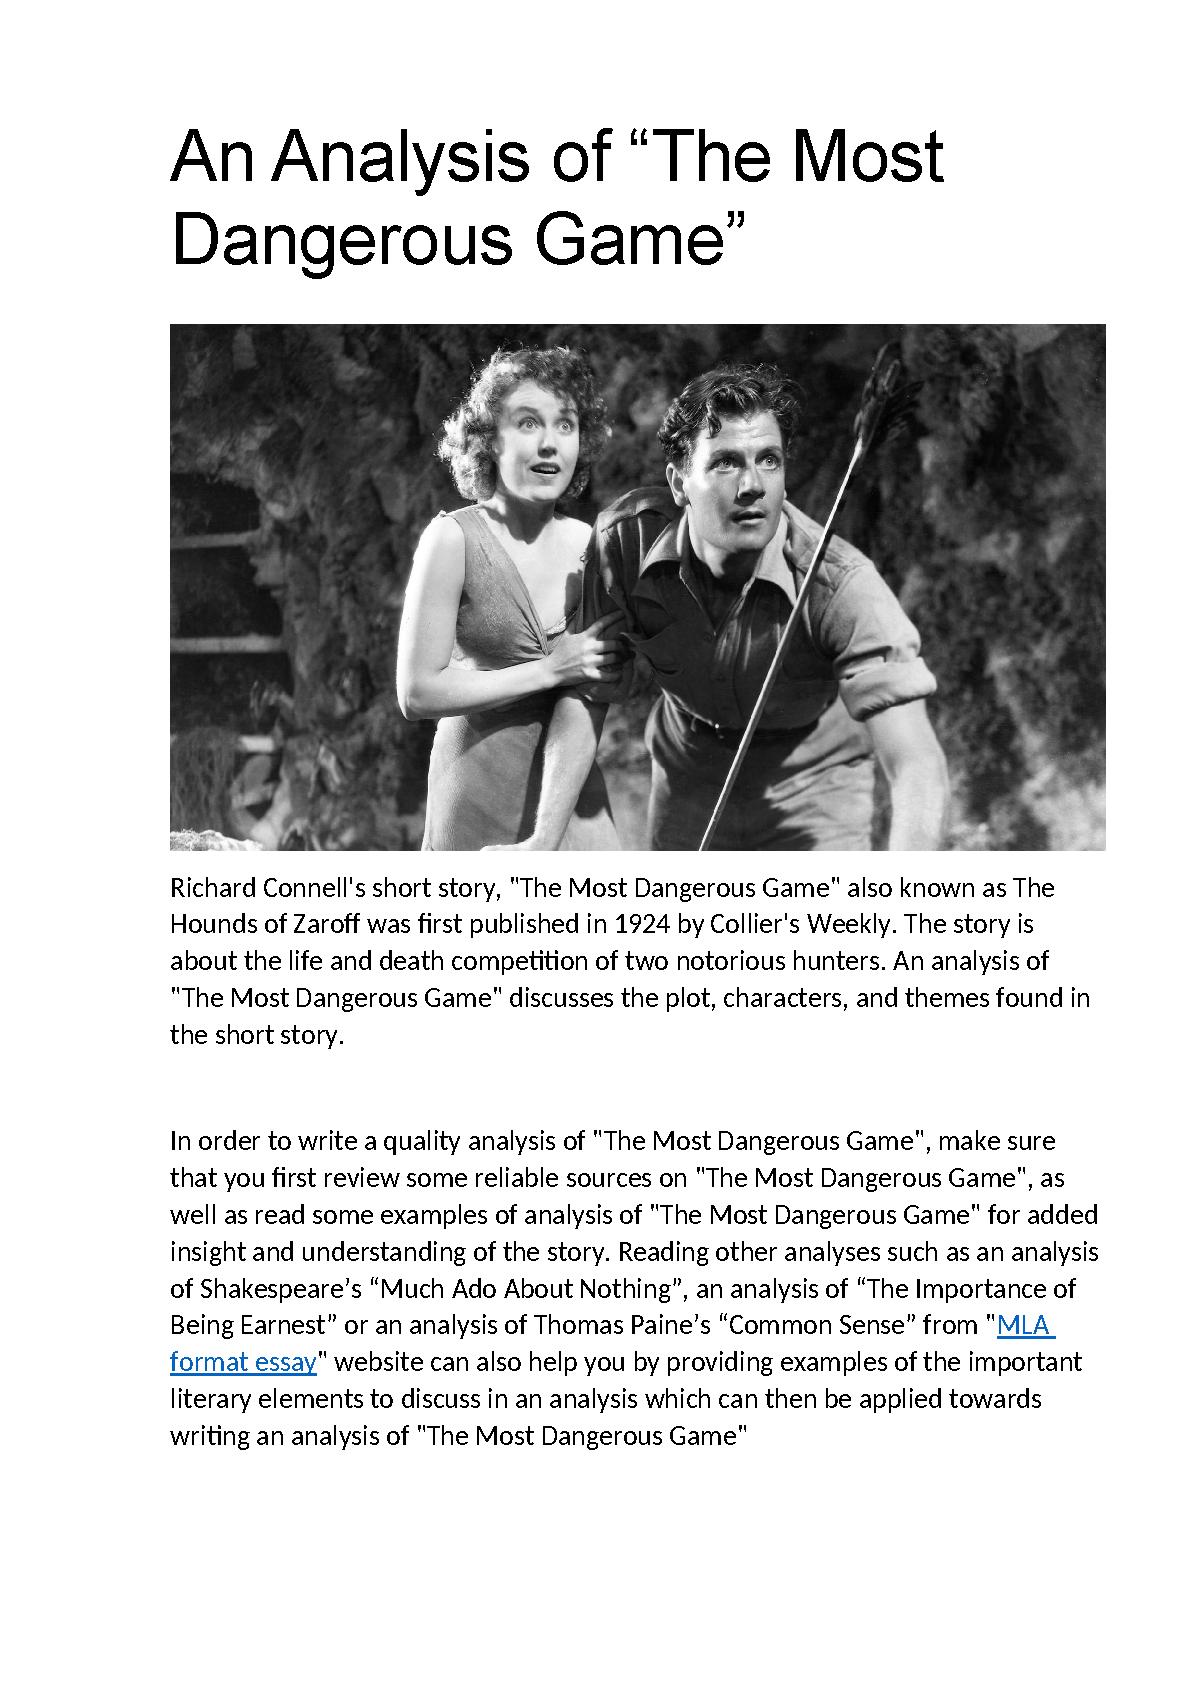 An Analysis of “The Most Dangerous Game”.pdf PDF Host